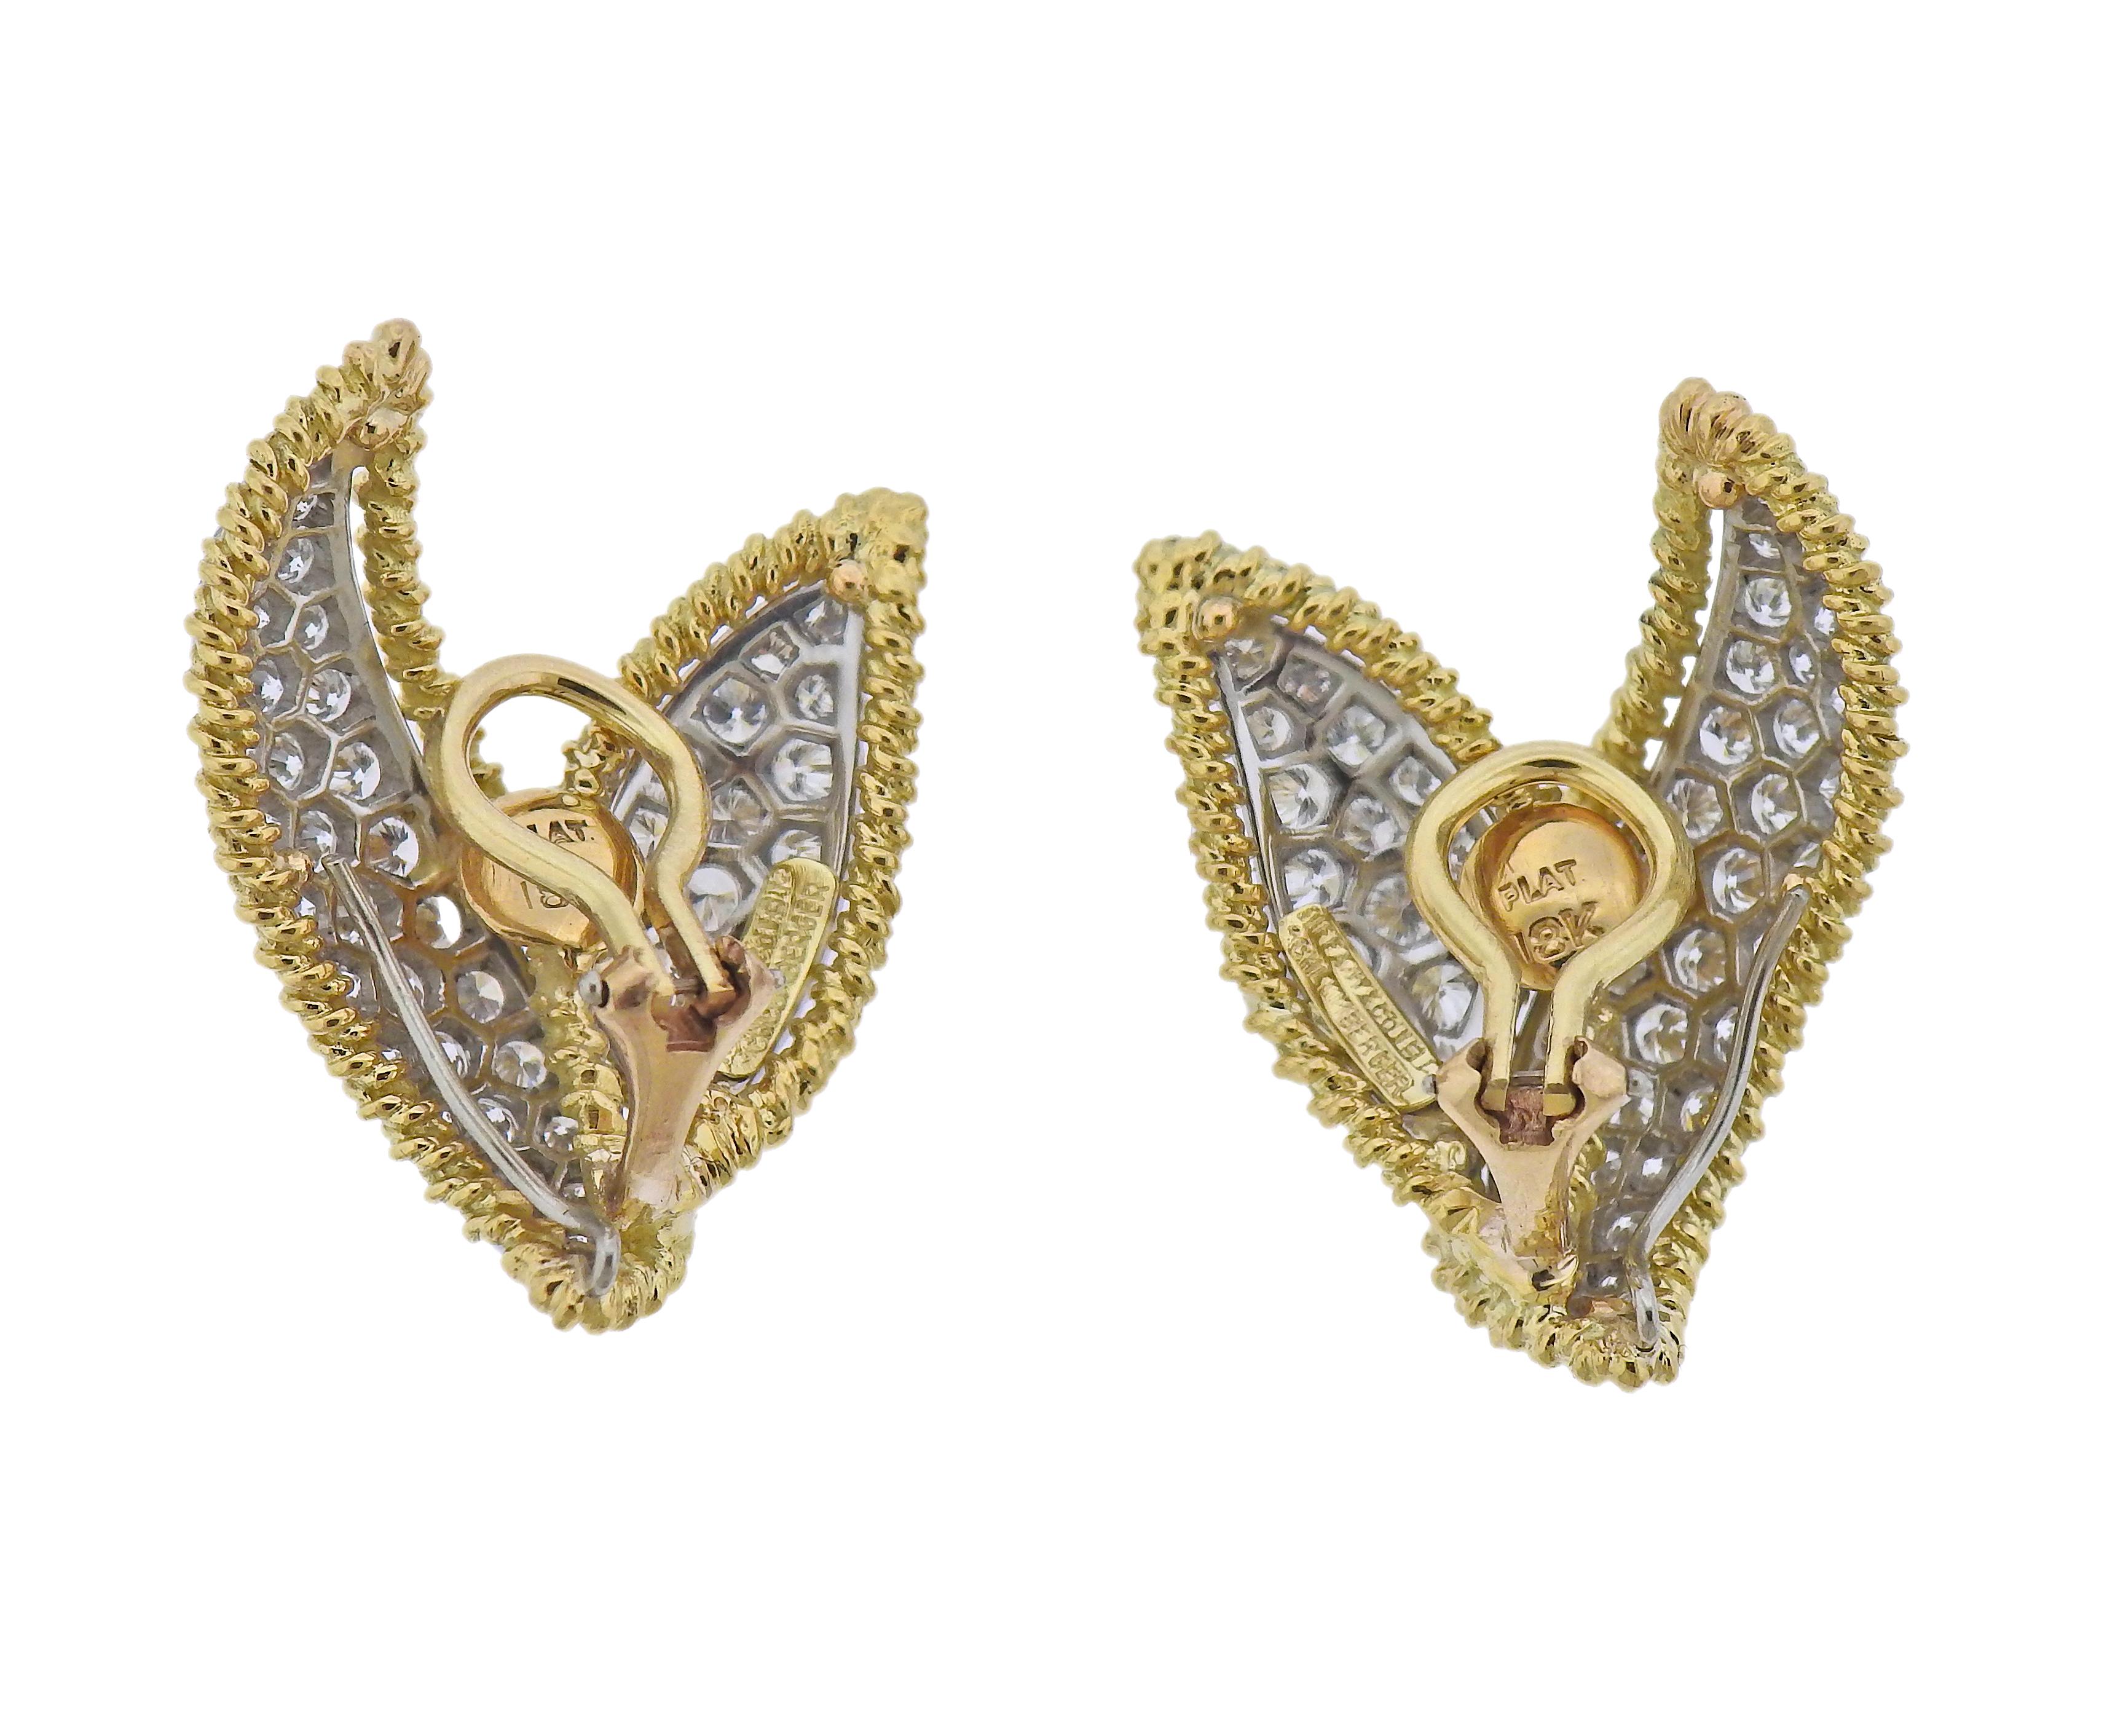 Pair of 18k gold and platinum earrings by Jean Schlumberger for Tiffany & Co, set with approx. 3.60ctw in diamonds. Earrings are 29mm x 25mm. Marked: Tiffany & Co, Schlumberger, Plat 18k. Weight - 16.8 grams.